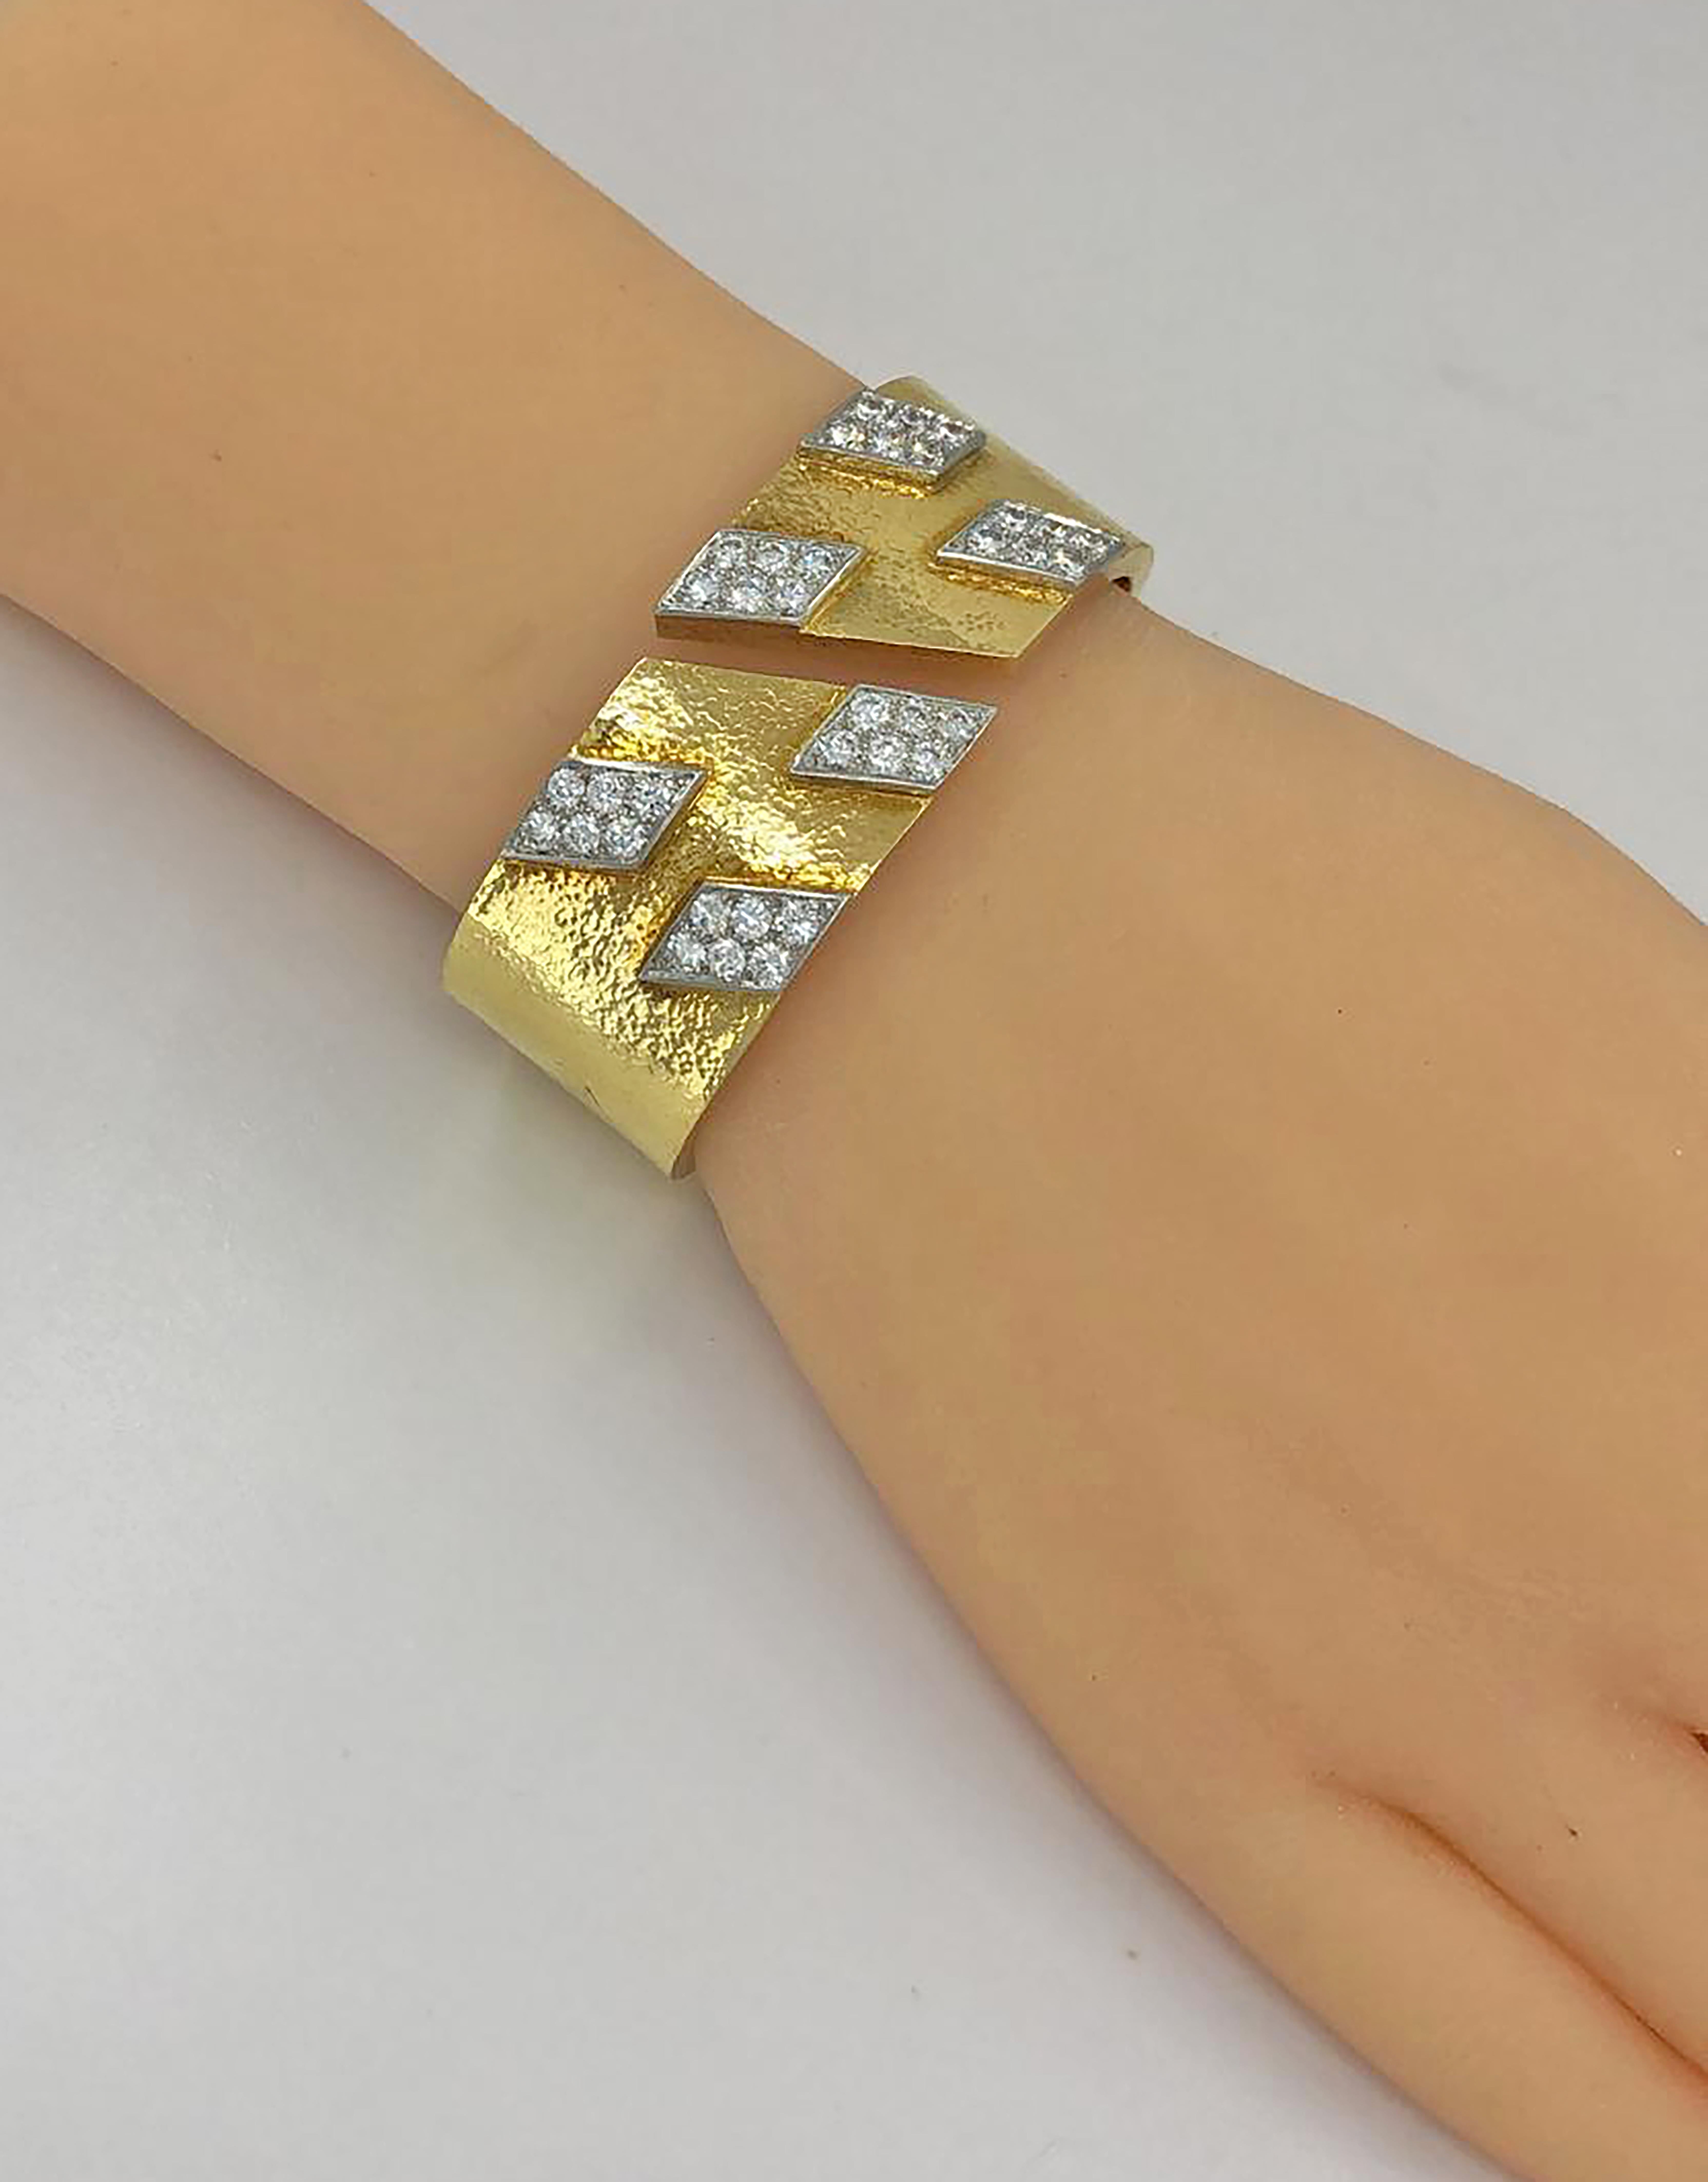 David Webb Diamond Spring Cuff Bracelet in 18k Yellow Gold and Platinum.

A David Webb wide spring bracelet textured with emblematic tactile gold, adorned with six slanted geometric panels of platinum set with diamonds. The bracelet appears heavy